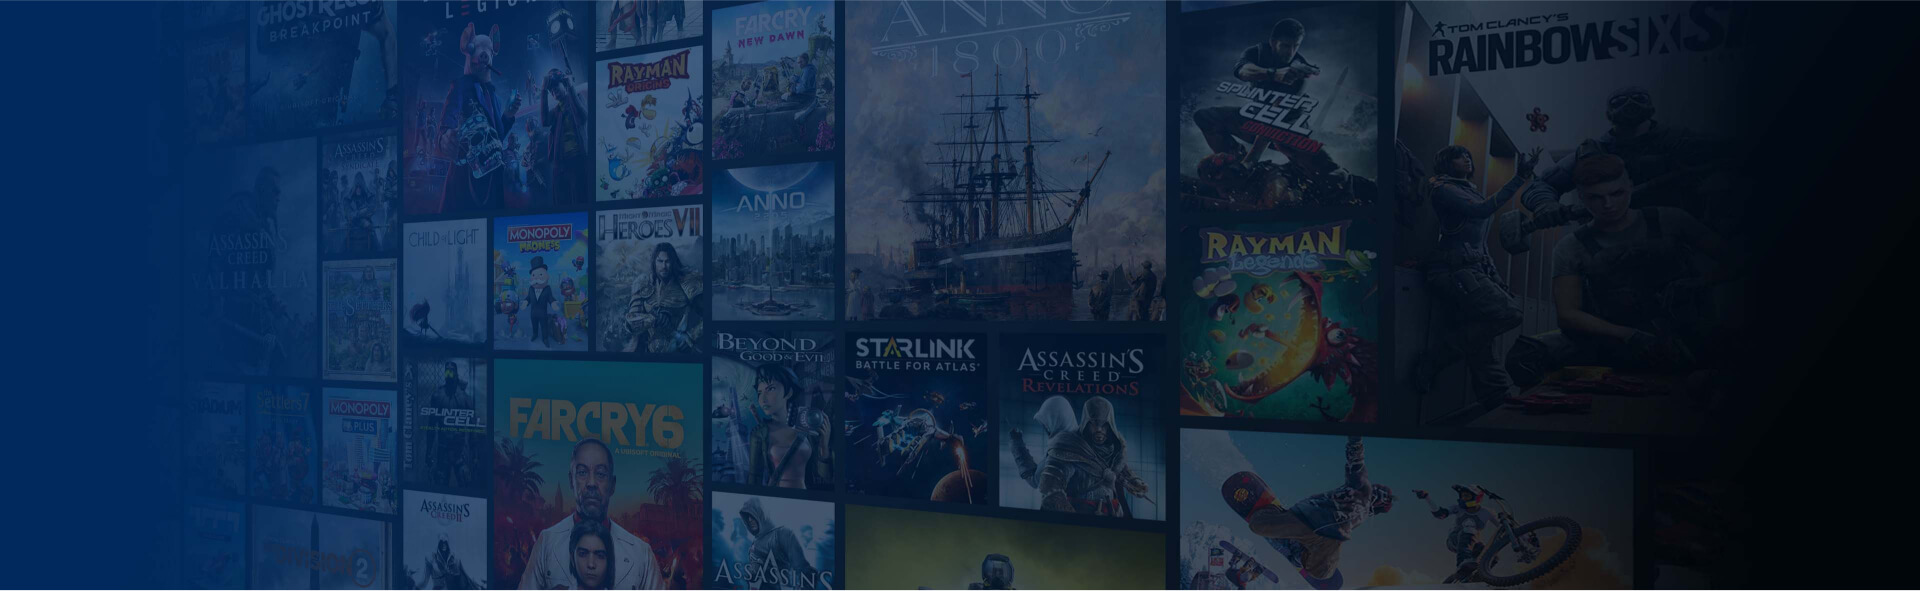 Mosaic representing the library of games available in Ubisoft+ subscription